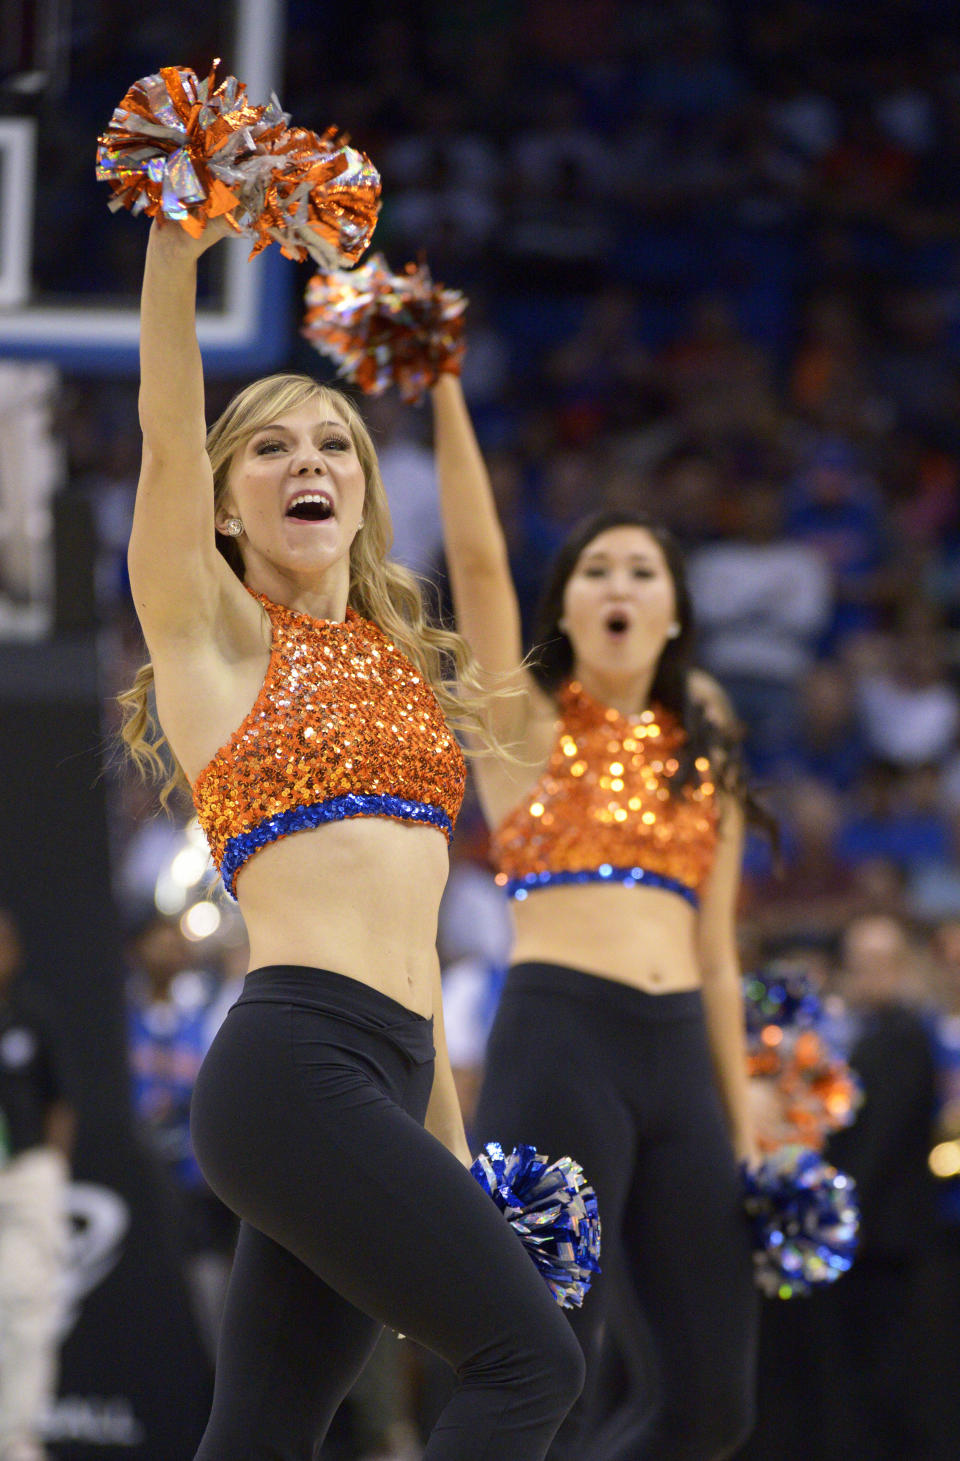 Florida cheerleaders perform during the first half in a third-round game at the NCAA college basketball tournament against Pittsburgh, Saturday, March 22, 2014, in Orlando, Fla. (AP Photo/Phelan M. Ebenhack)